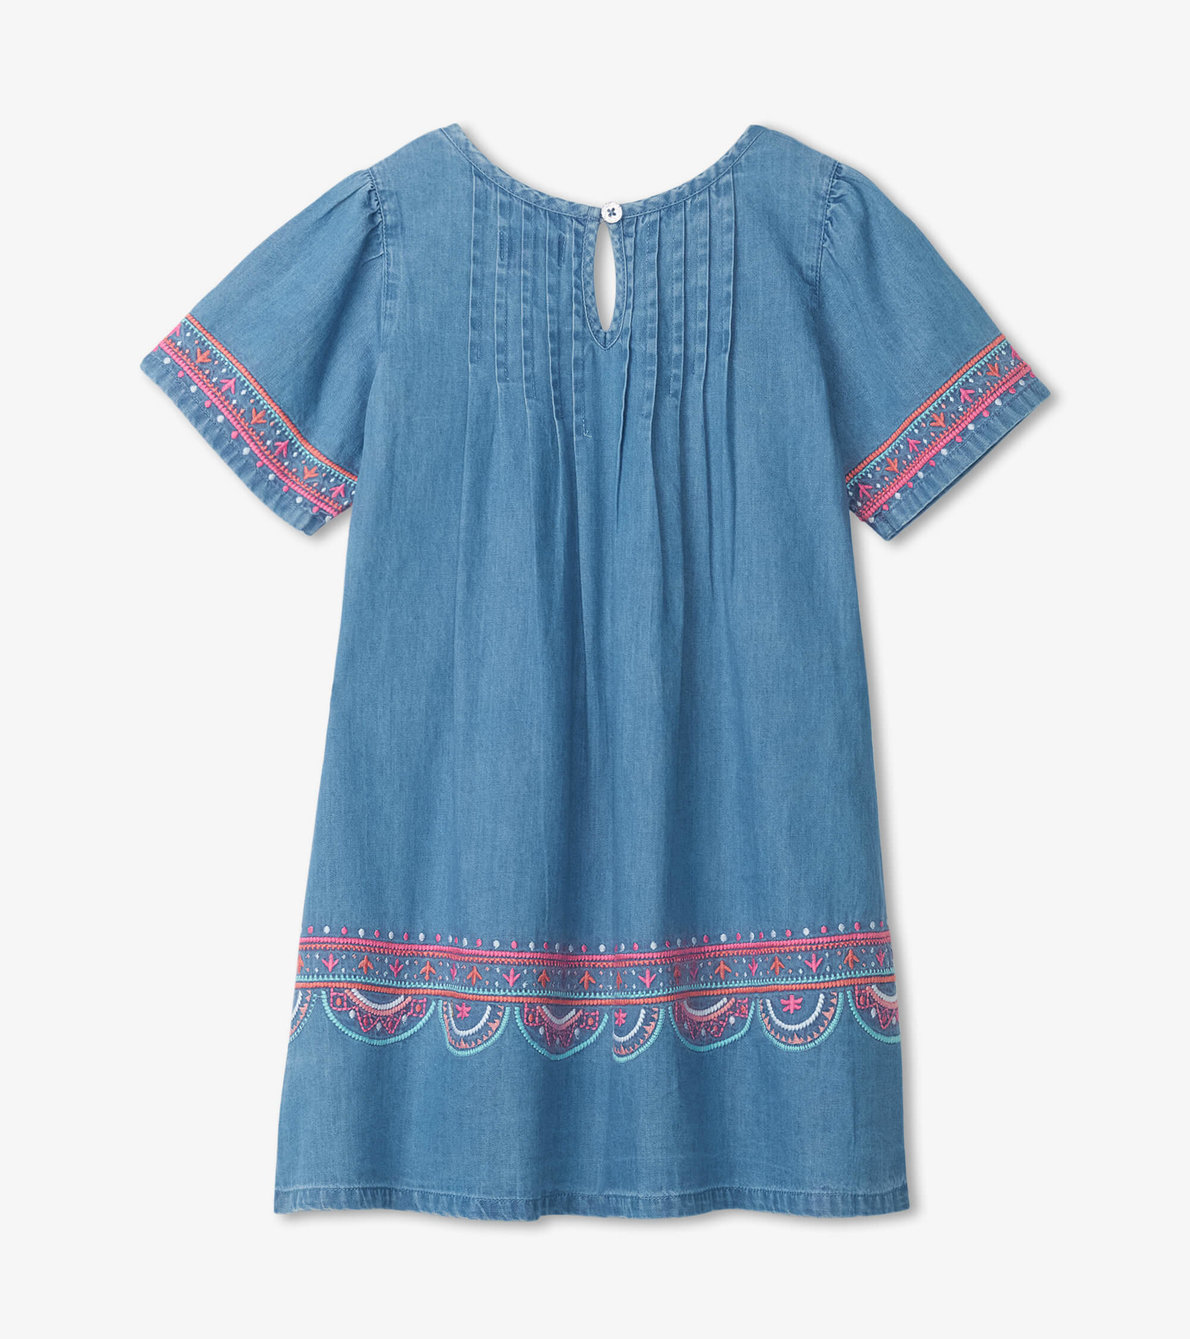 View larger image of Denim Embroidered Dress